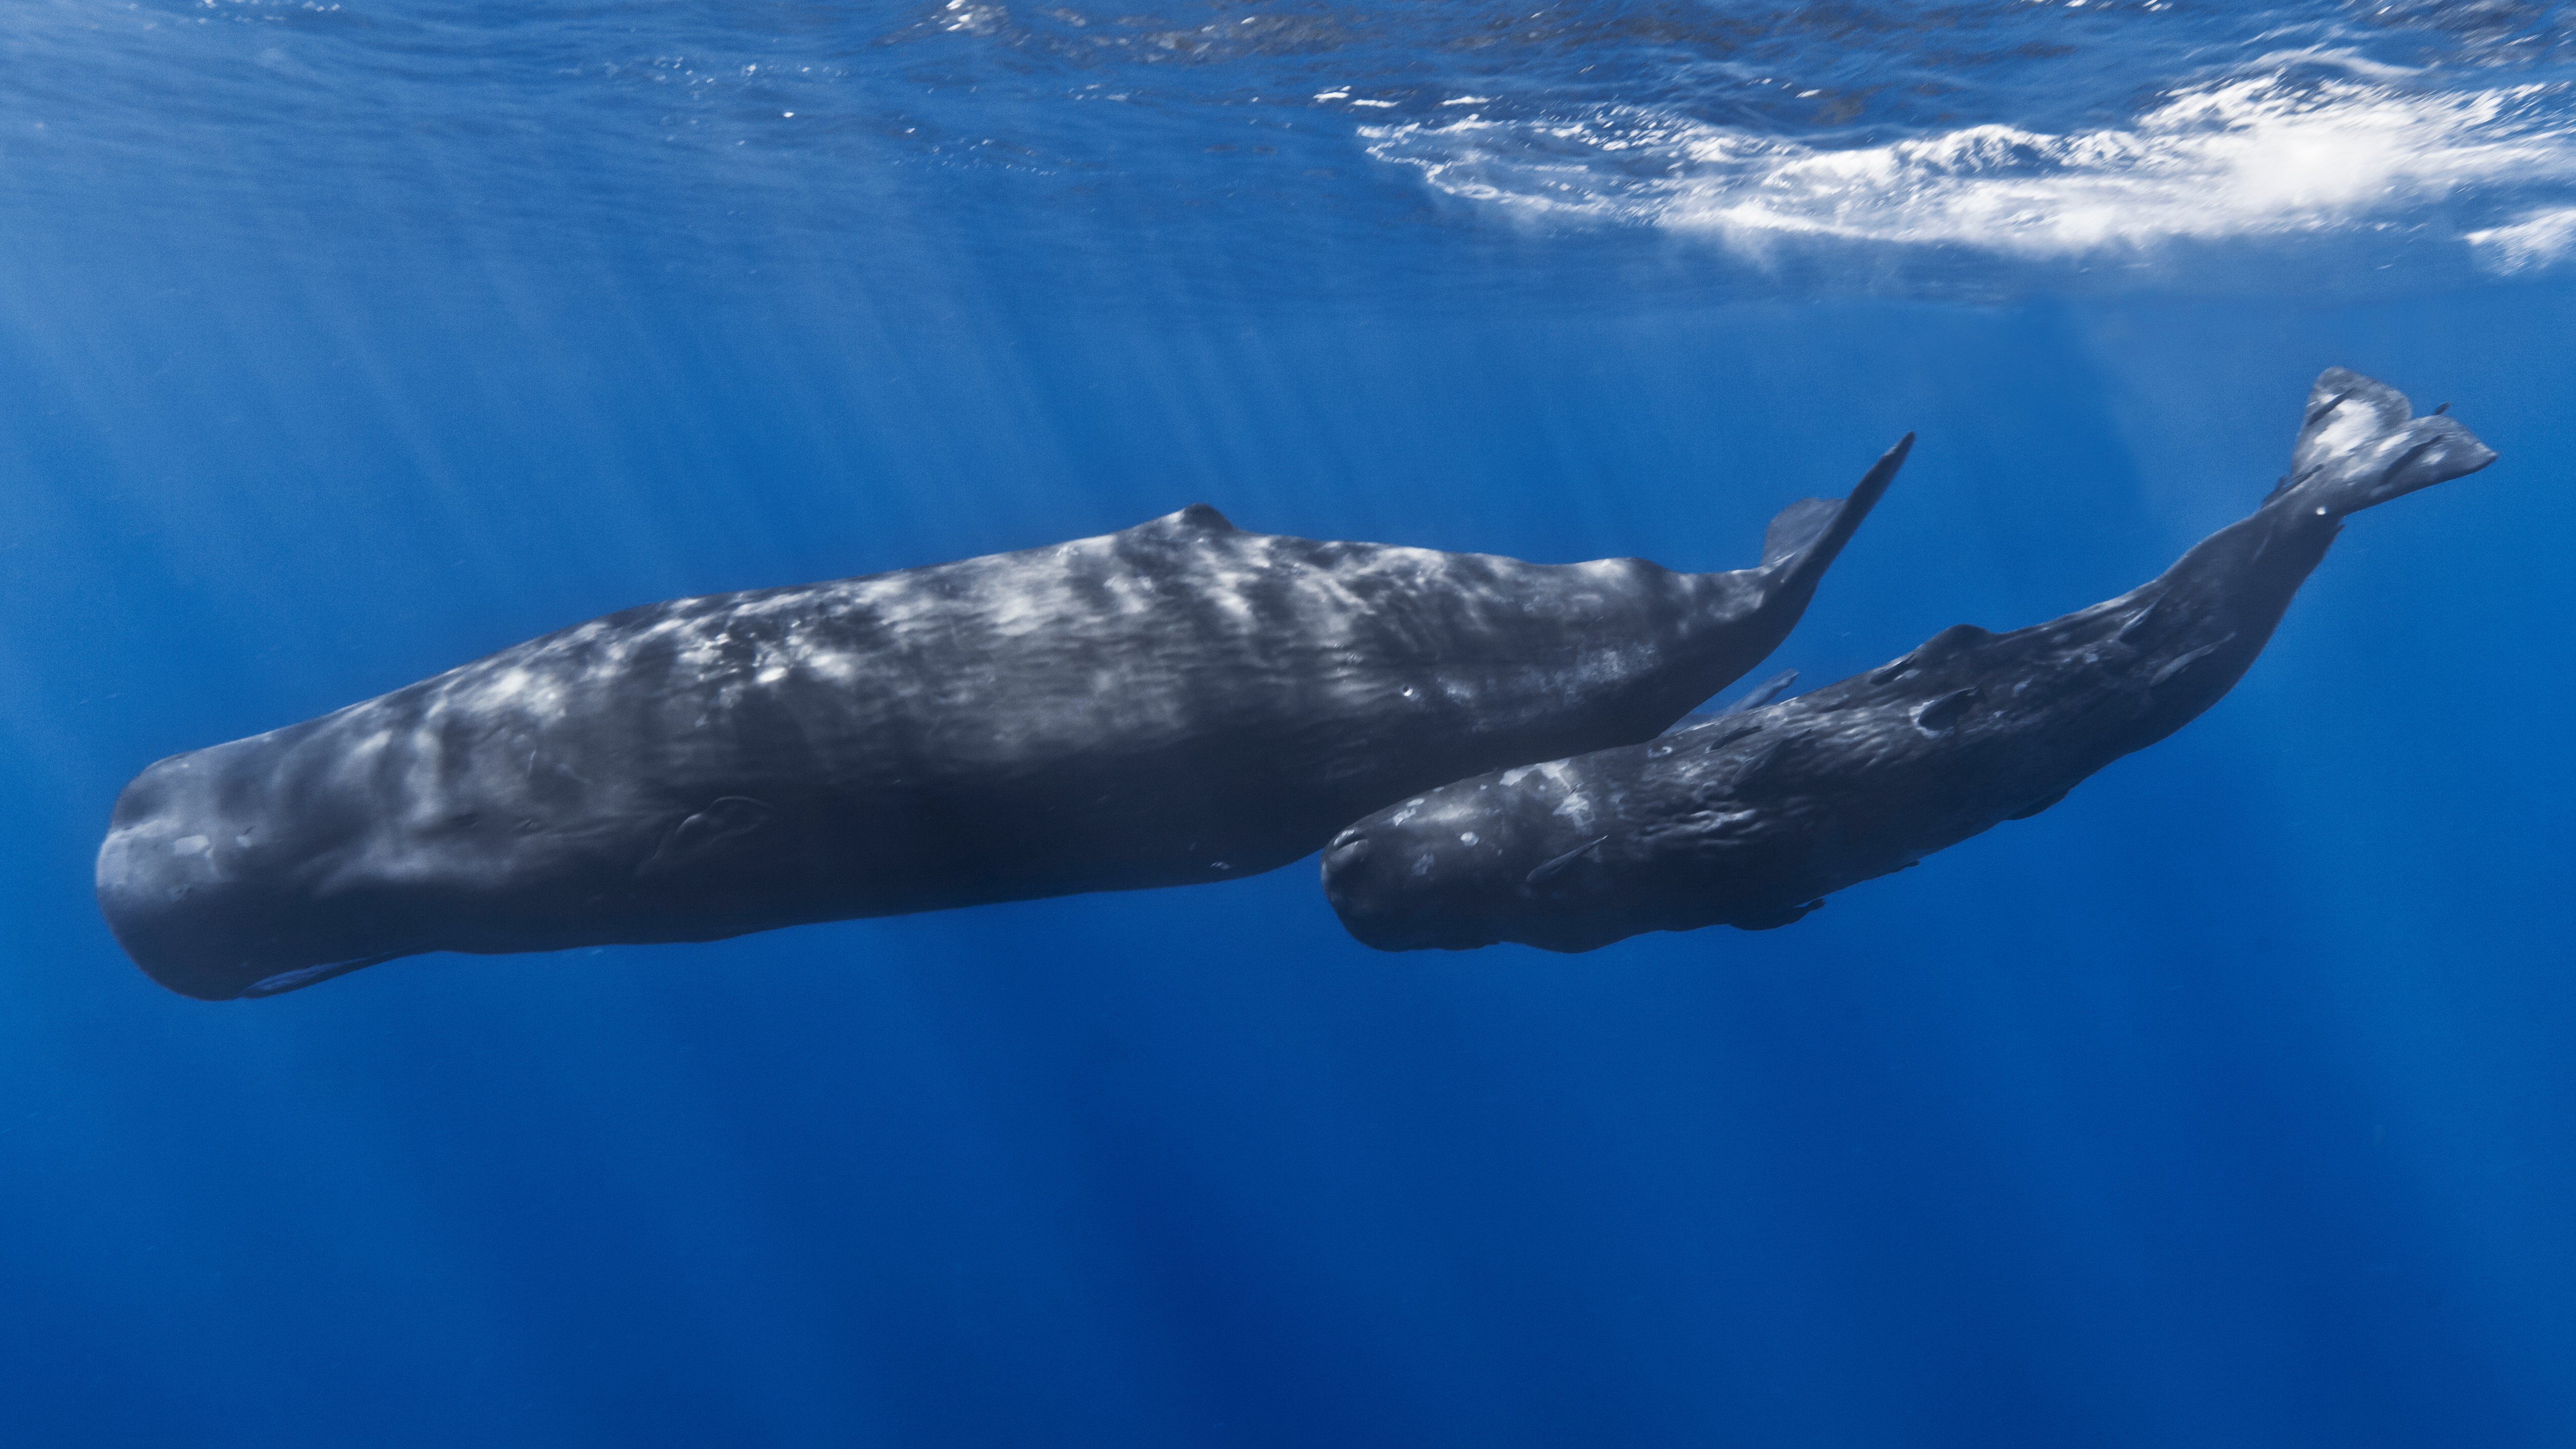 Listen to the sperm whale